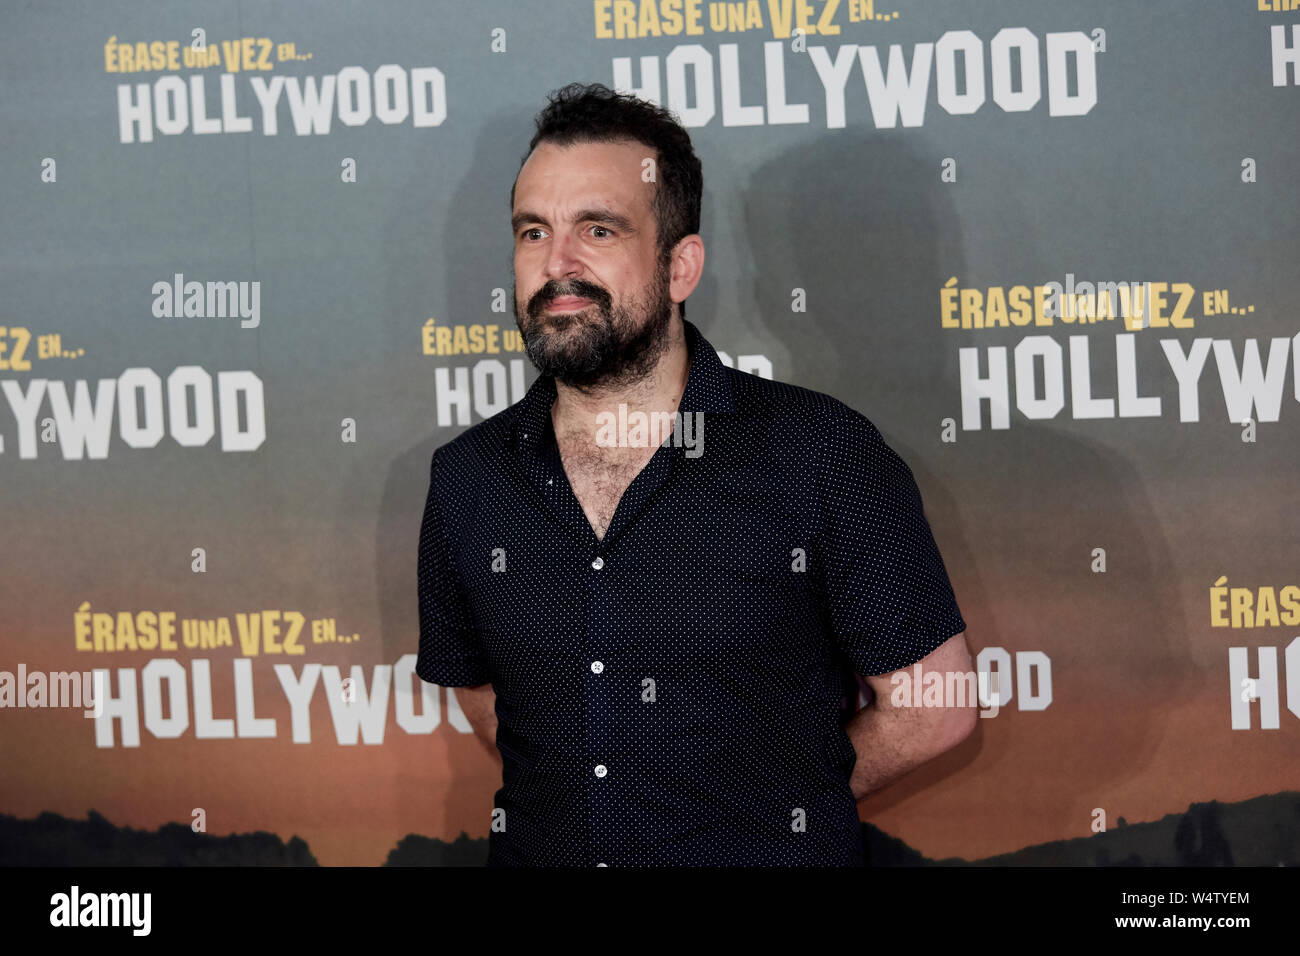 Madrid, Spain. 24th July, 2019. Nacho Vigalondo attends to 'Erase una vez en Hollywood' (Once Upon a Time in. Hollywood) film premiere at Dore Cinema in Madrid, Spain. Credit: SOPA Images Limited/Alamy Live News Stock Photo